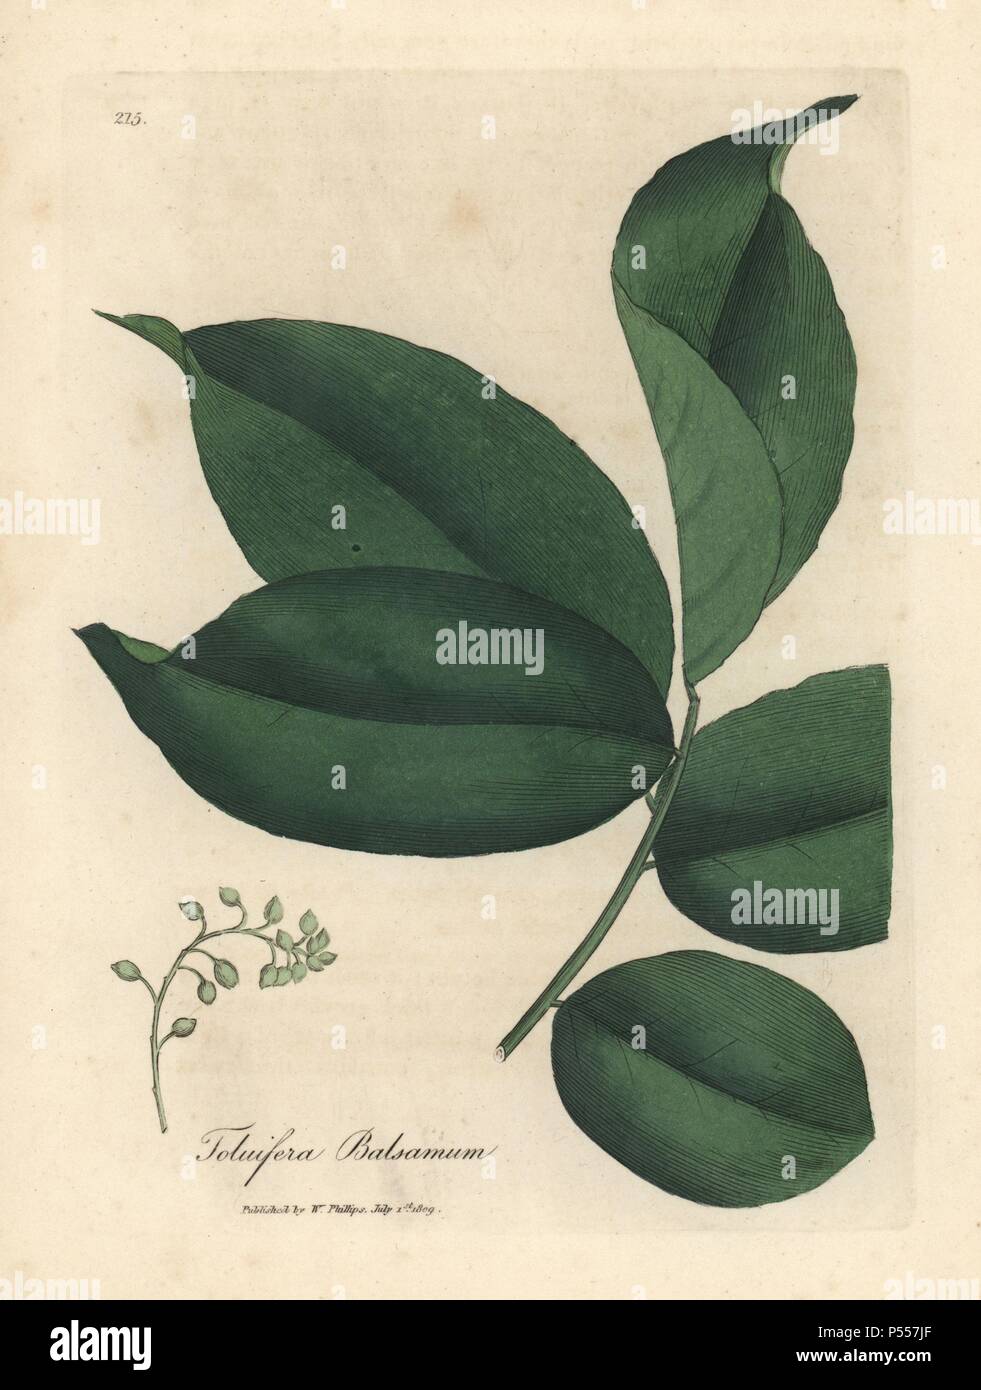 Balsam of Tolu tree, Myroxylon toluifera balsamum. Handcoloured copperplate engraving from a botanical illustration by James Sowerby from William Woodville and Sir William Jackson Hooker's 'Medical Botany,' John Bohn, London, 1832. The tireless Sowerby (1757-1822) drew over 2, 500 plants for Smith's mammoth 'English Botany' (1790-1814) and 440 mushrooms for 'Coloured Figures of English Fungi ' (1797) among many other works. Stock Photo